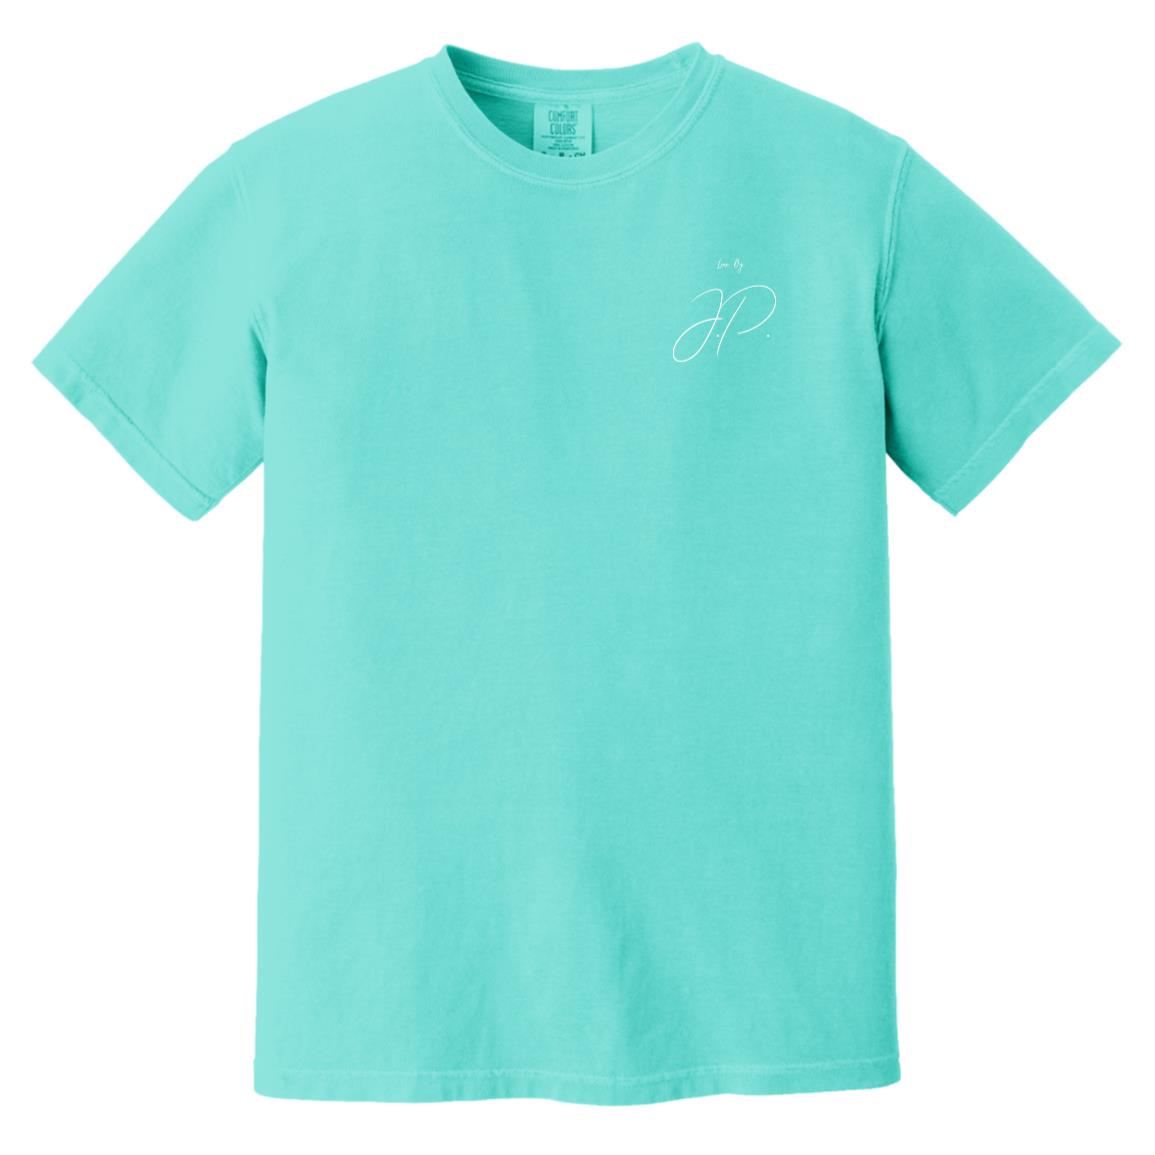 Lux. Heavyweight T-Shirt - Lagoon Blue - Colors Edition